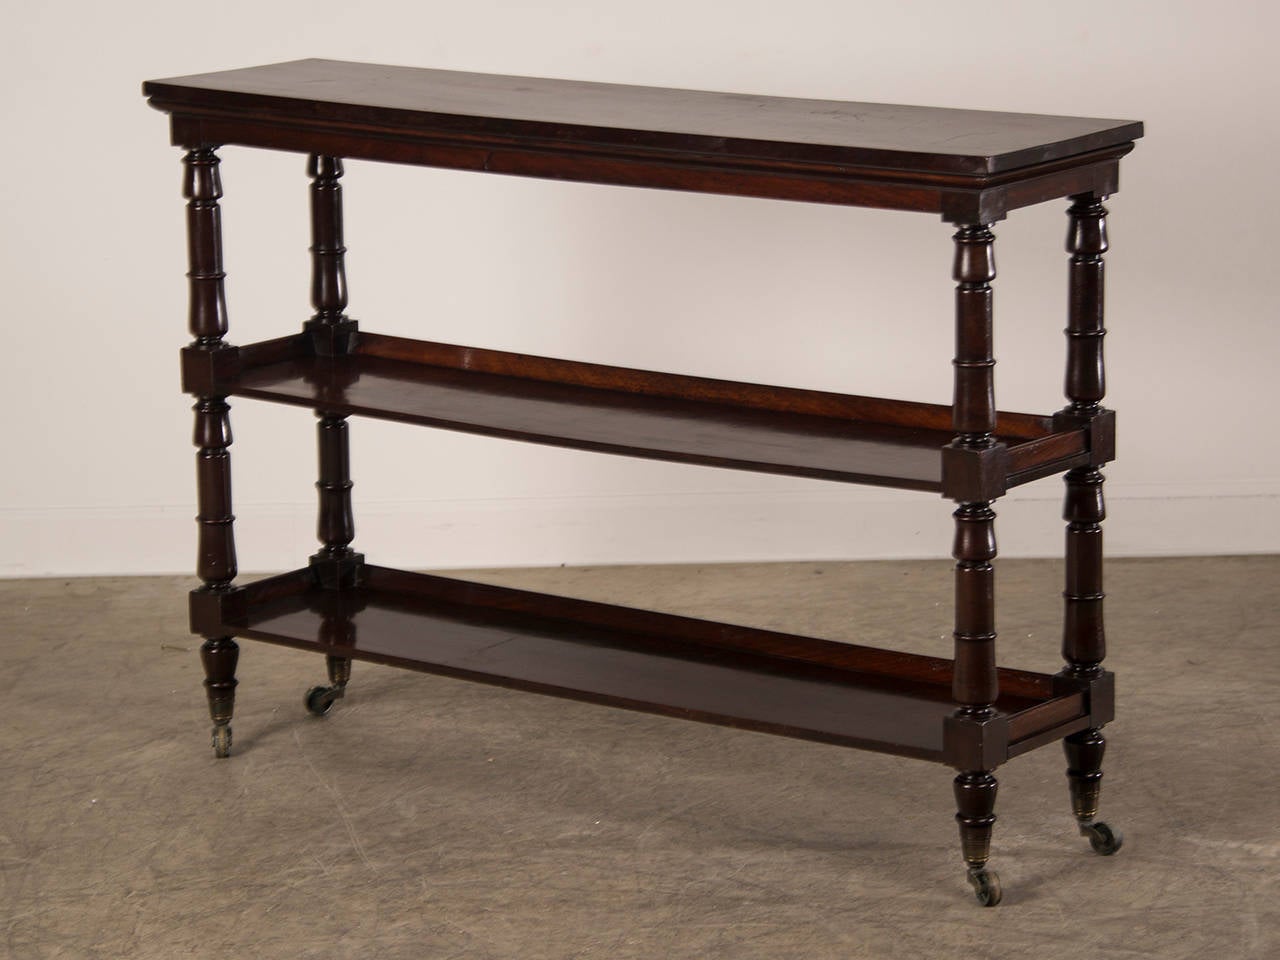 Receive our new selections direct from 1stdibs by email each week. Please click Follow Dealer below and see them first!

A slender antique English mahogany butler's stand or etagere circa 1860 with turned vertical supports standing on the original